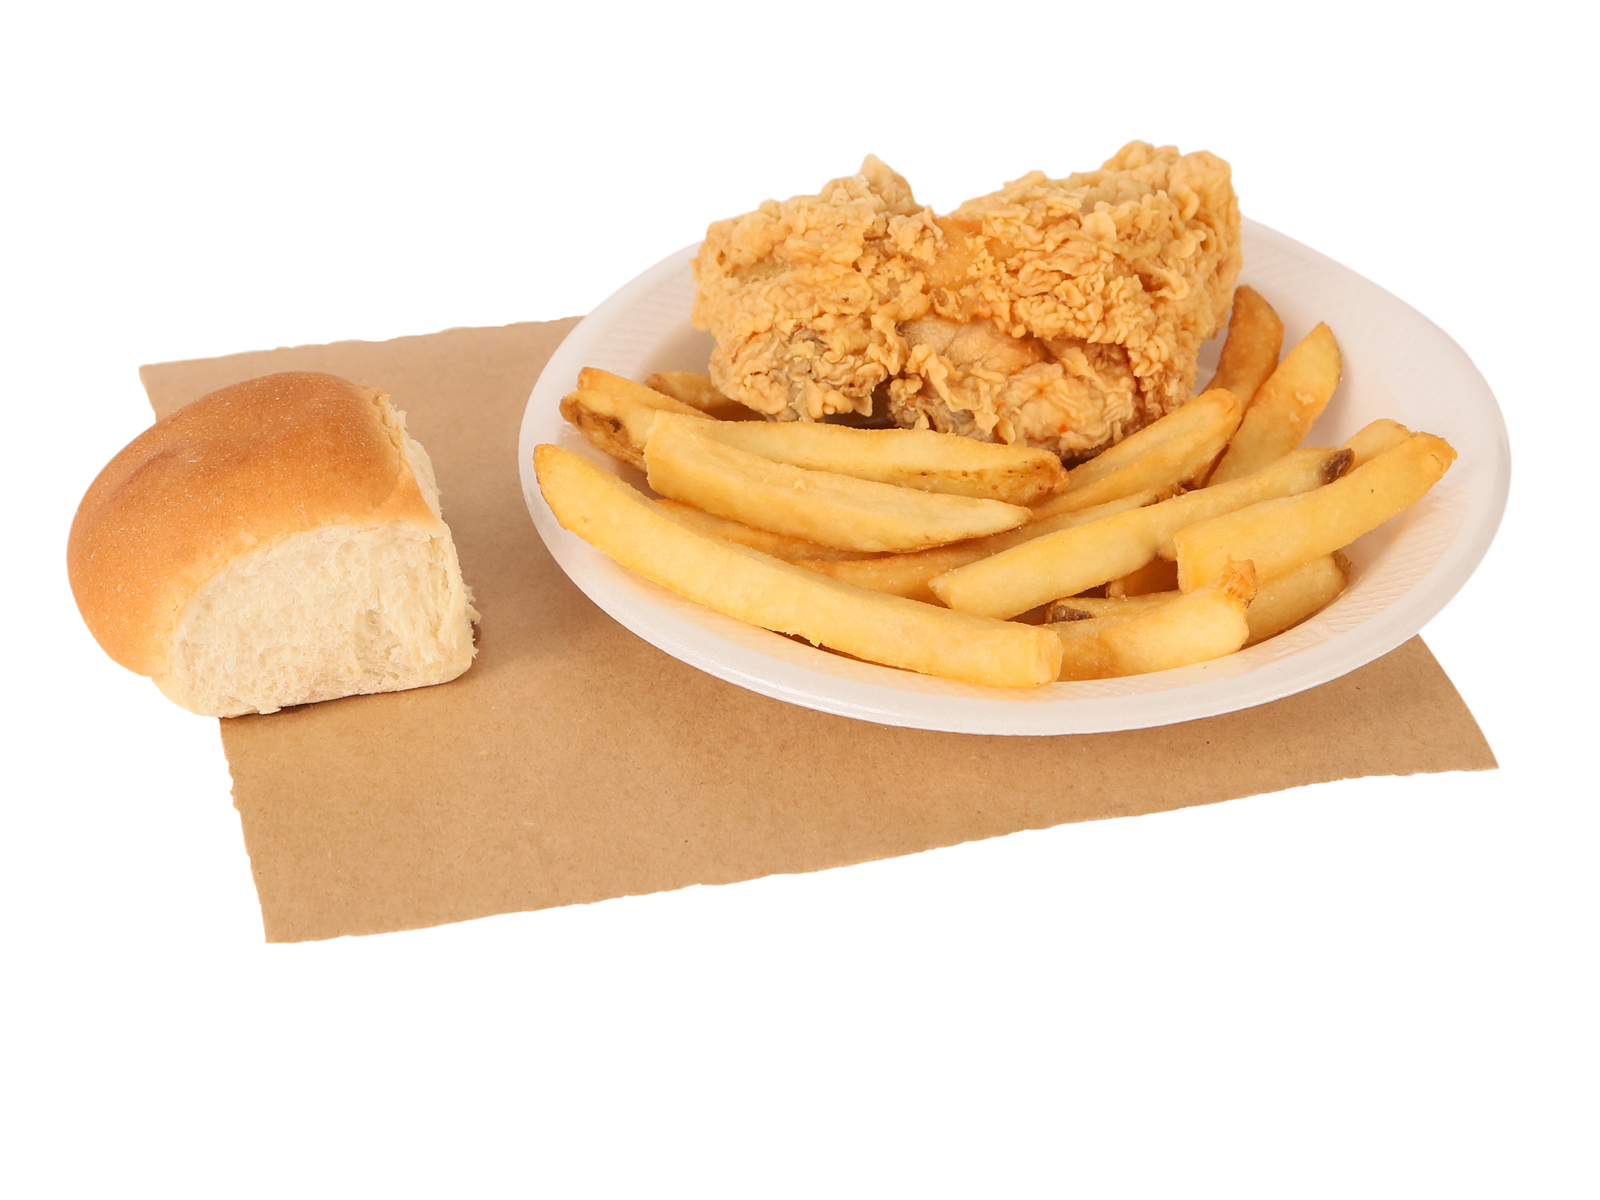 1 PC. Fried Chicken Breast served with french fries & dinner roll